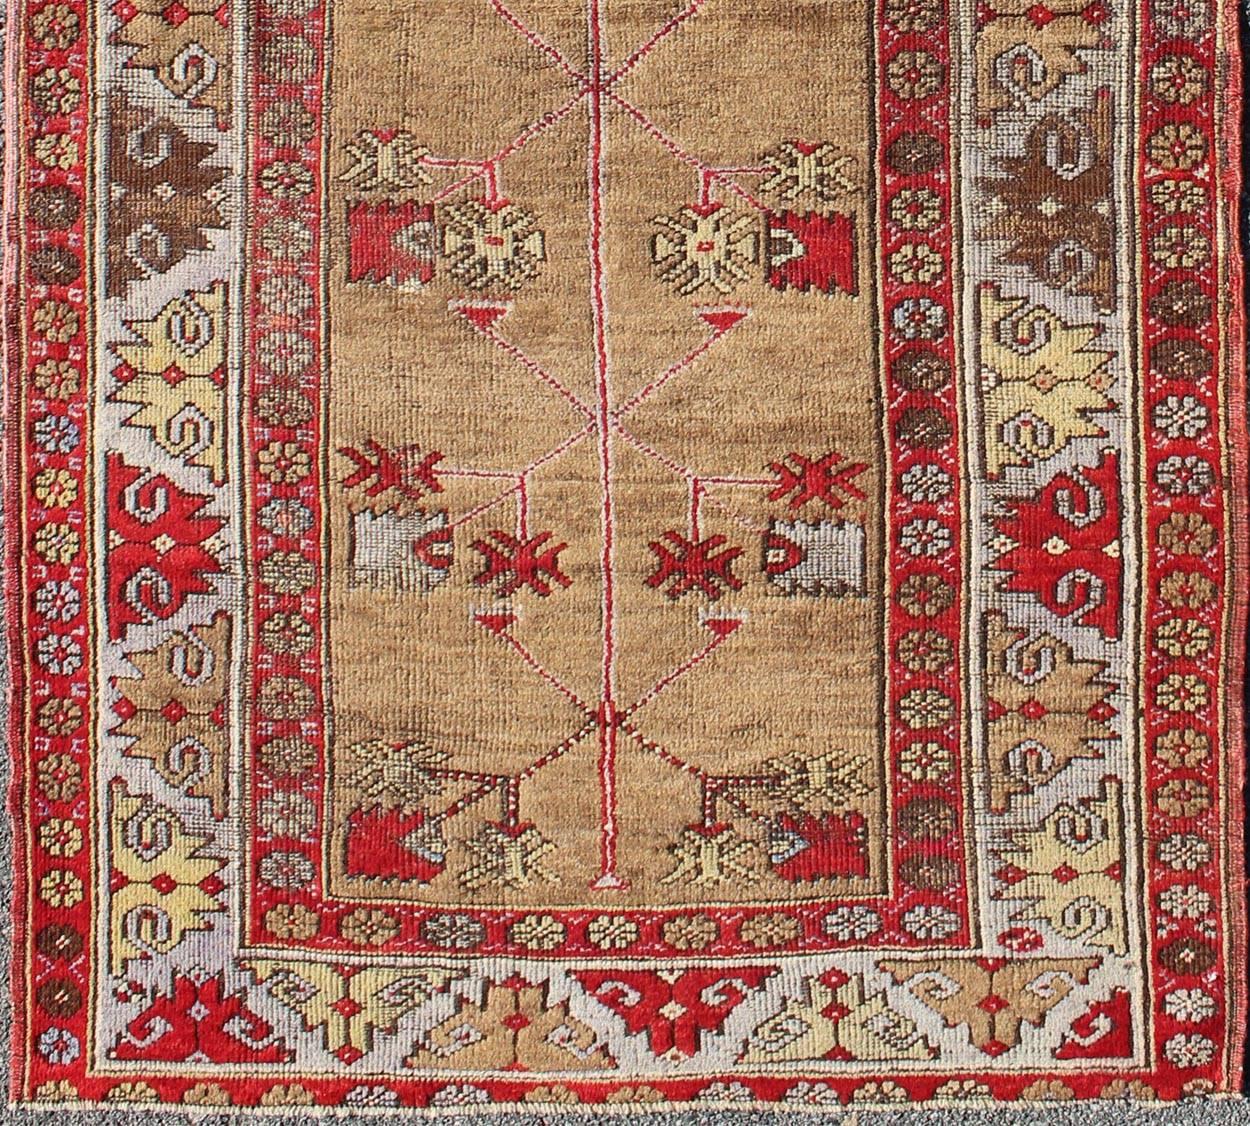 Multicolored antique Turkish Oushak runner with geometrics and flowers, Keivan Woven Arts / rug IS-109, country of origin / type: Turkey / Oushak, circa 1920

This Turkish tribal rug was woven in 1920s, Turkey. The emphasis with these rugs is on